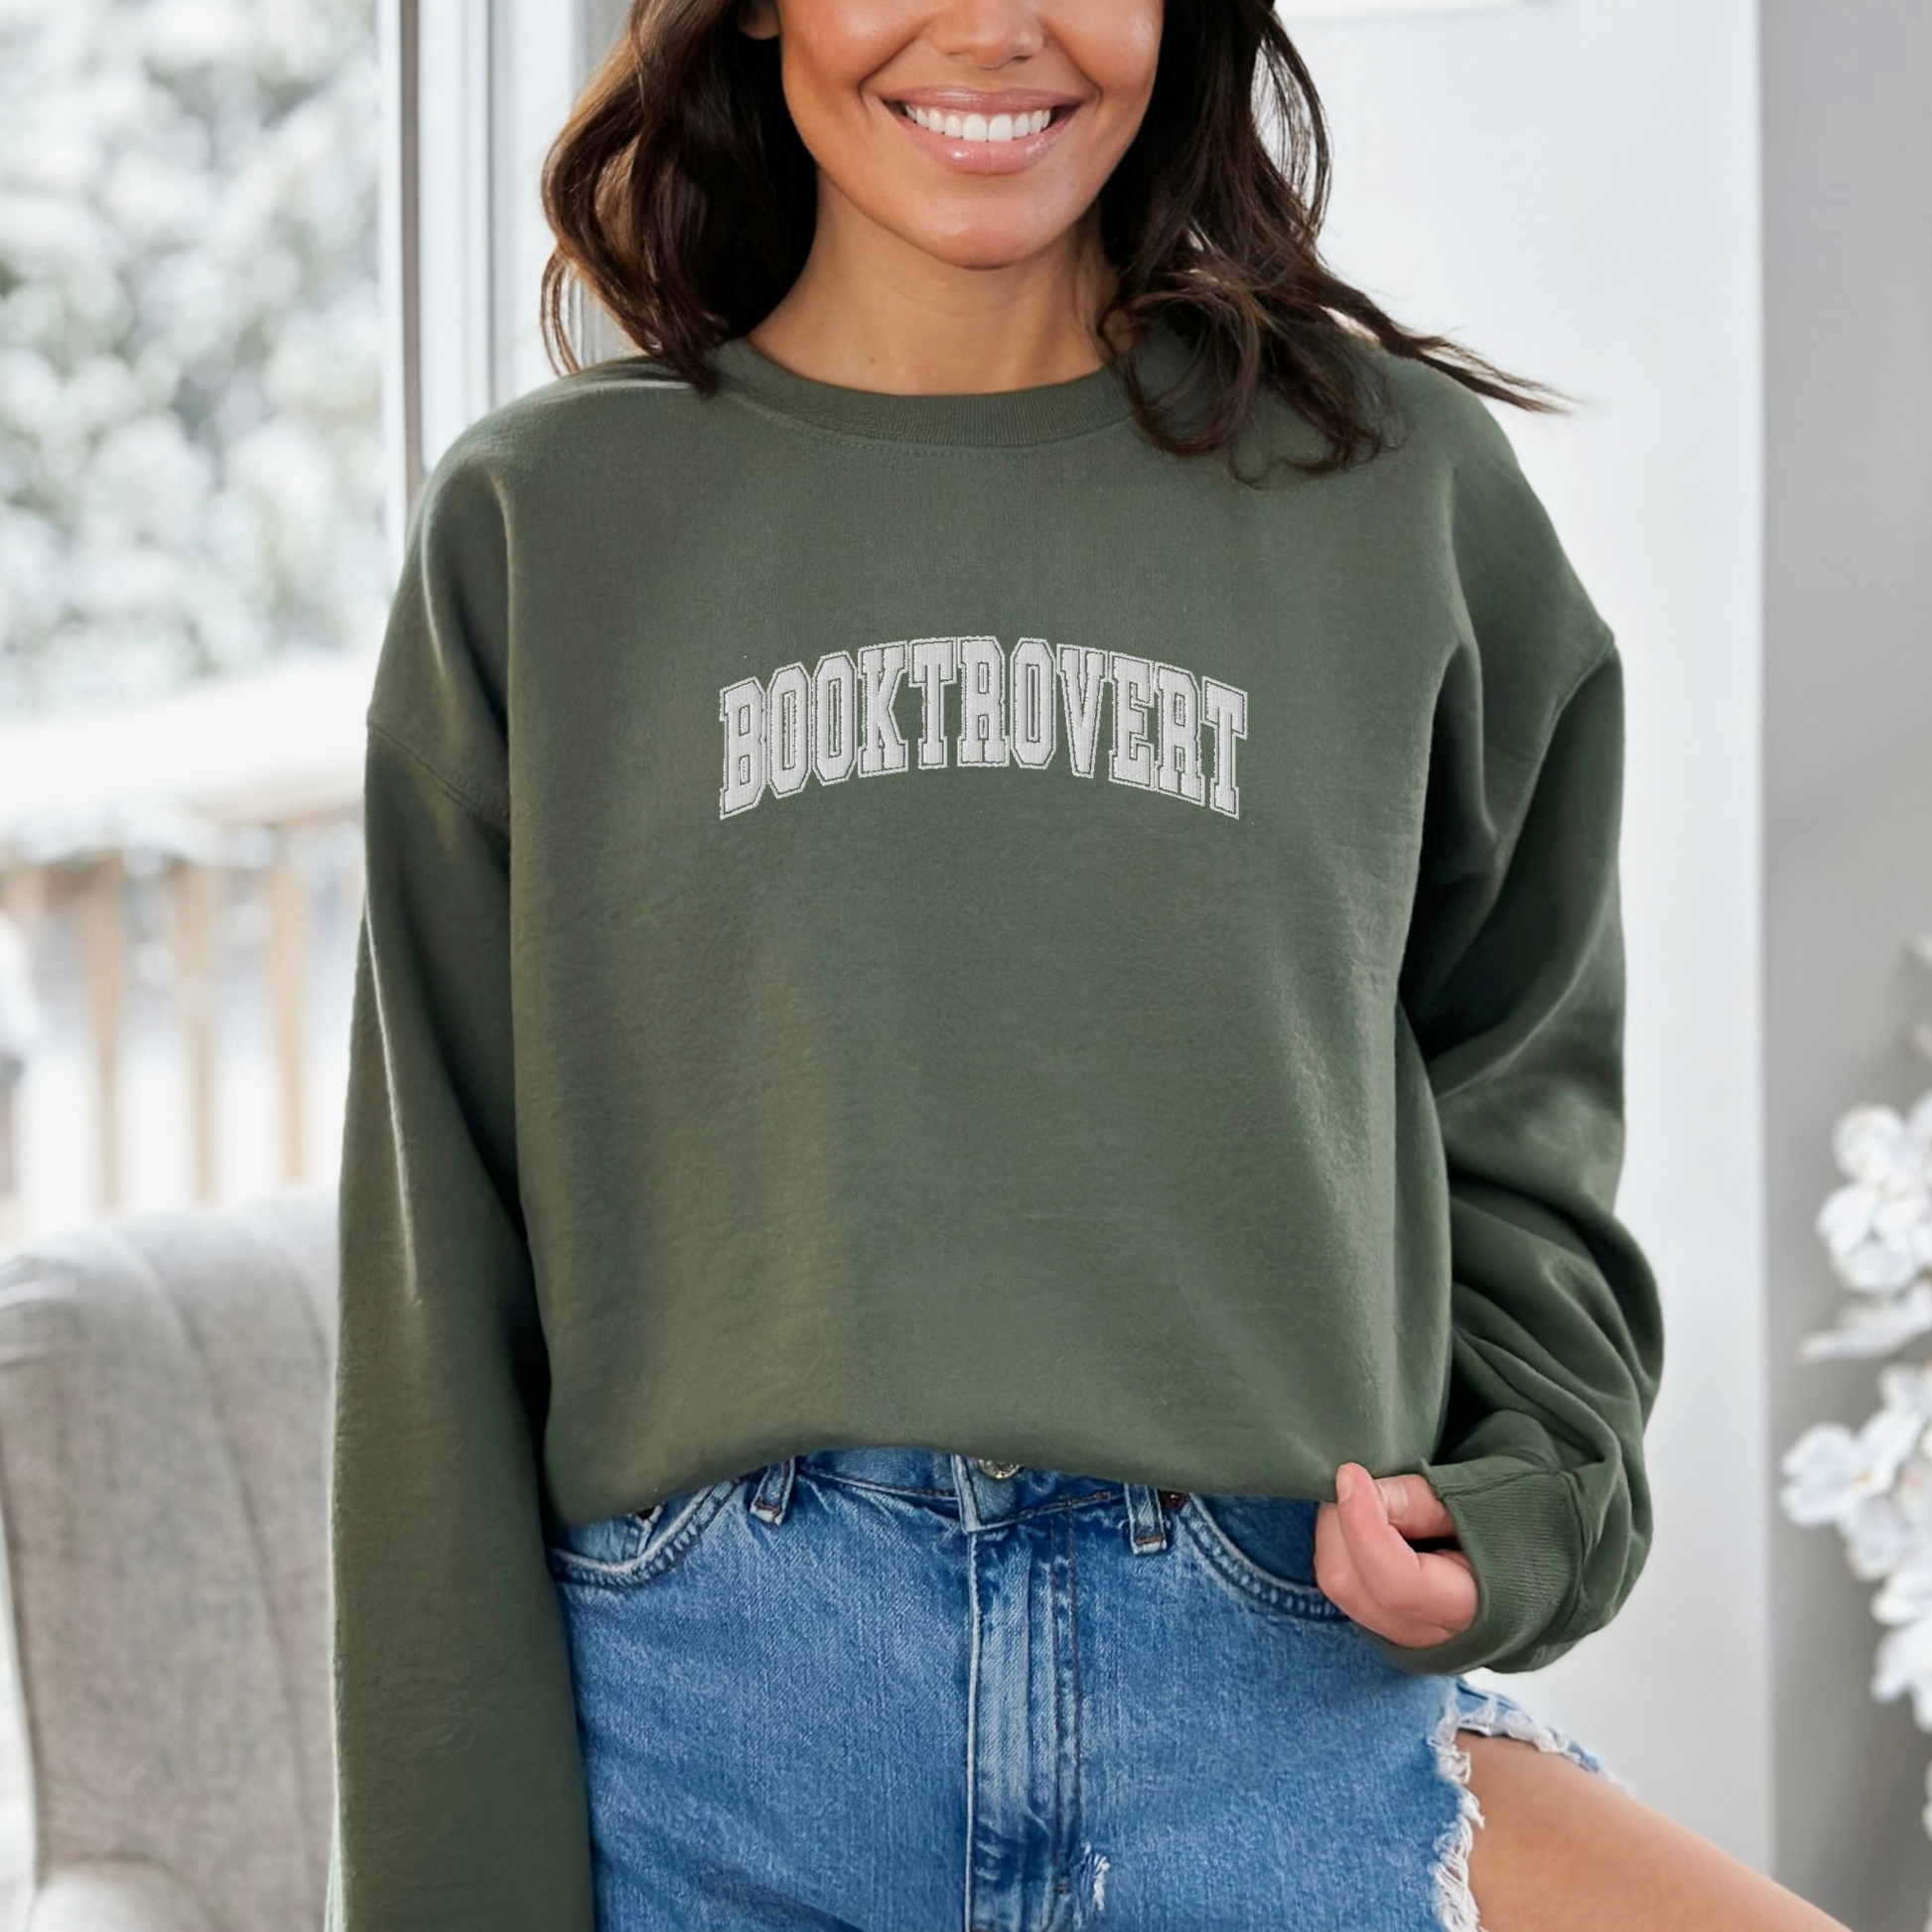 Sweatshirt with Booktrovert embroidered. The embroidery adds a touch of class and sophistication, making it a standout piece in your wardrobe.